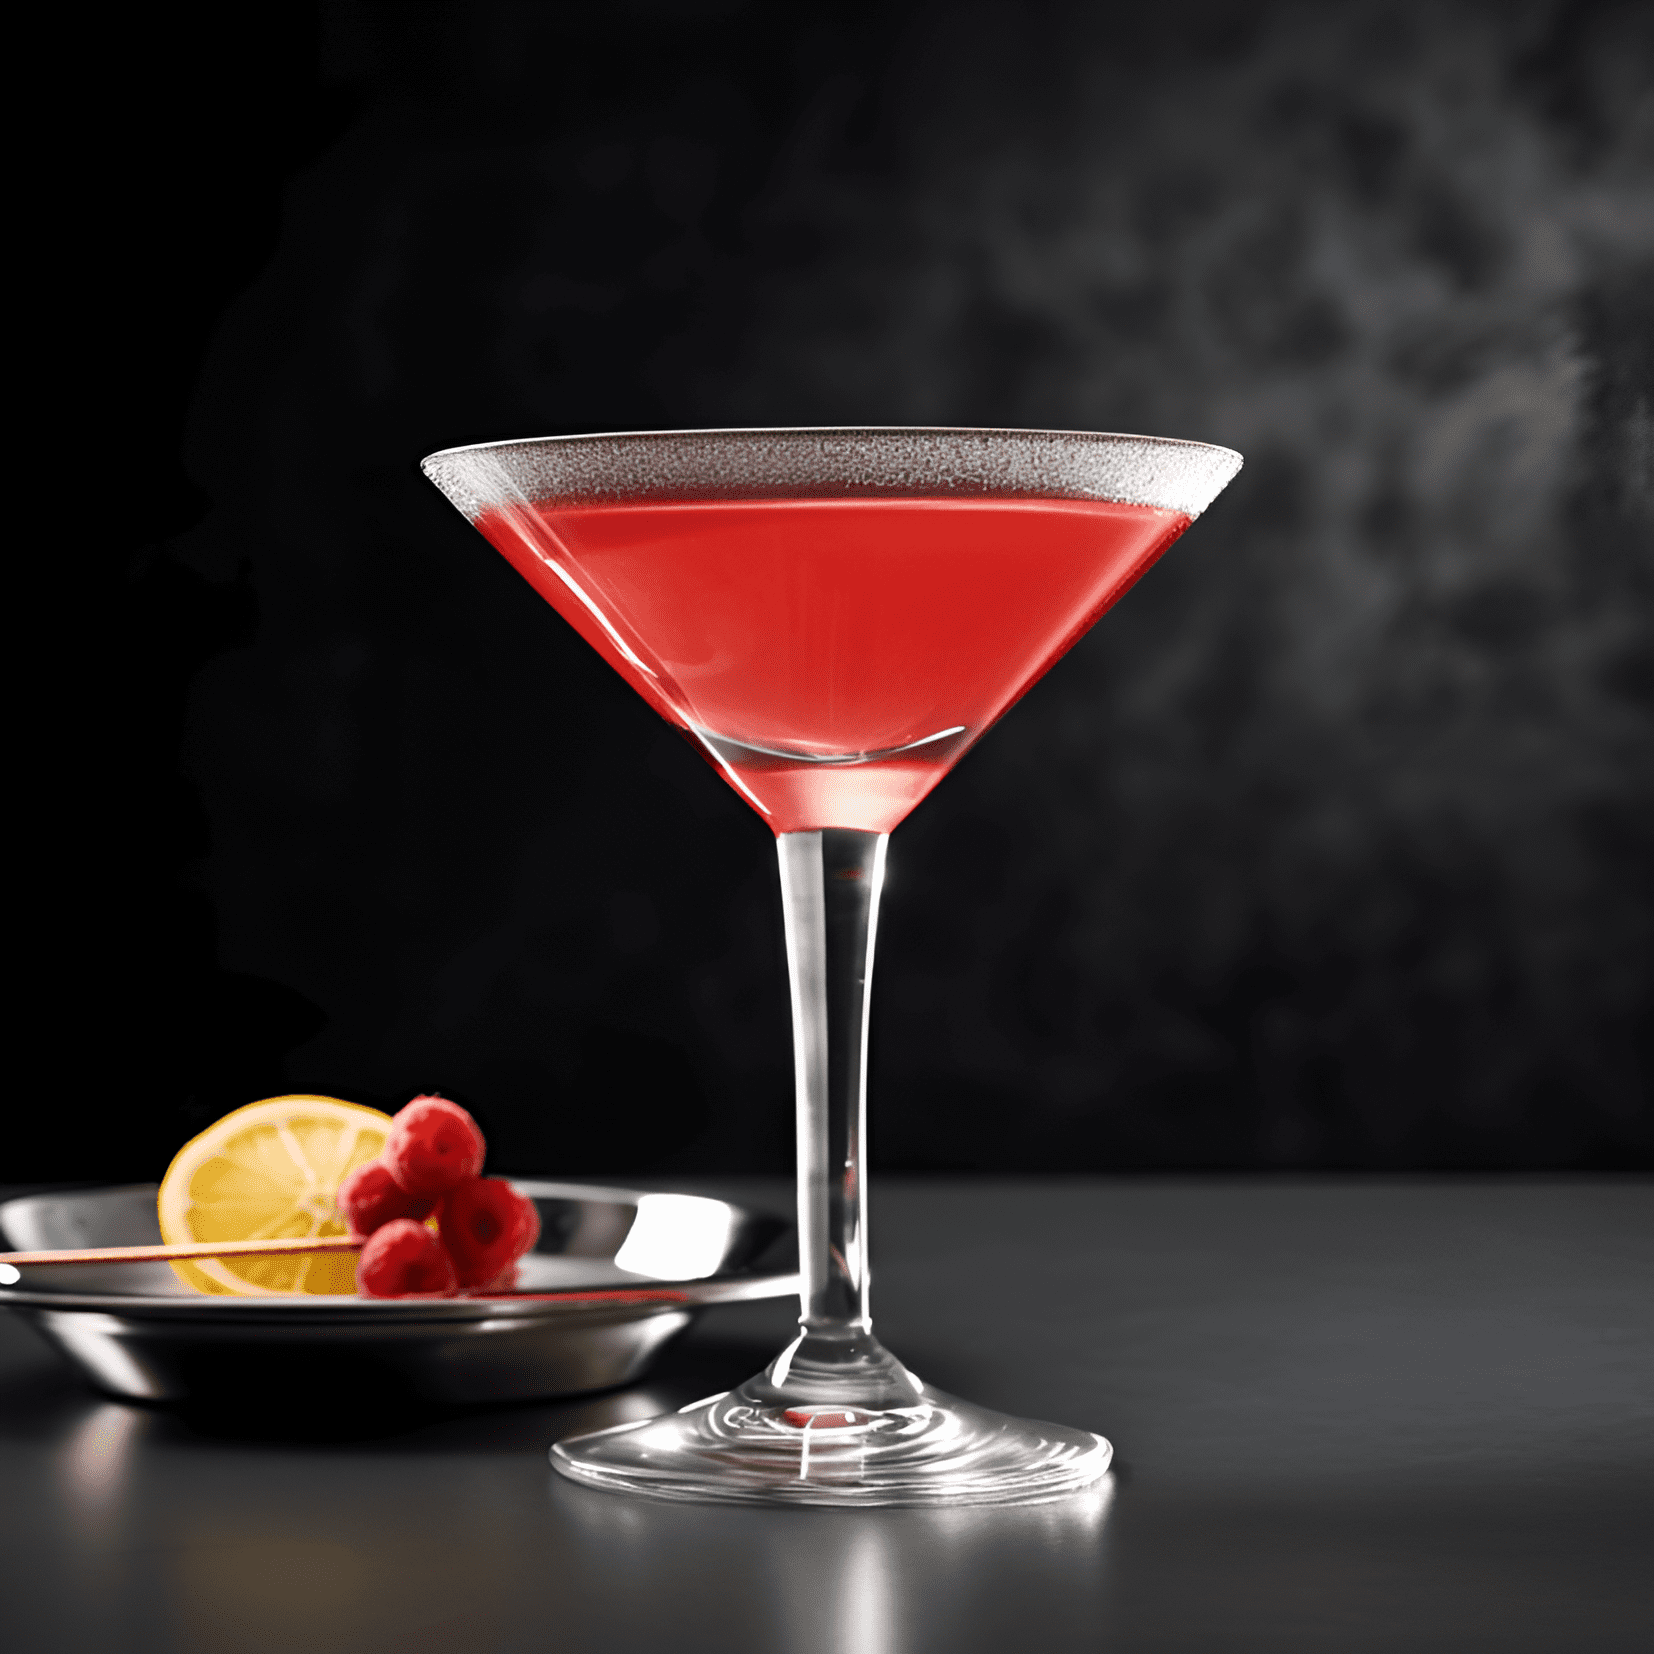 French Martini Cocktail Recipe - The French Martini has a rich, velvety texture with a sweet and fruity taste. The combination of pineapple juice, Chambord, and vodka creates a well-balanced flavor profile that is both refreshing and indulgent.